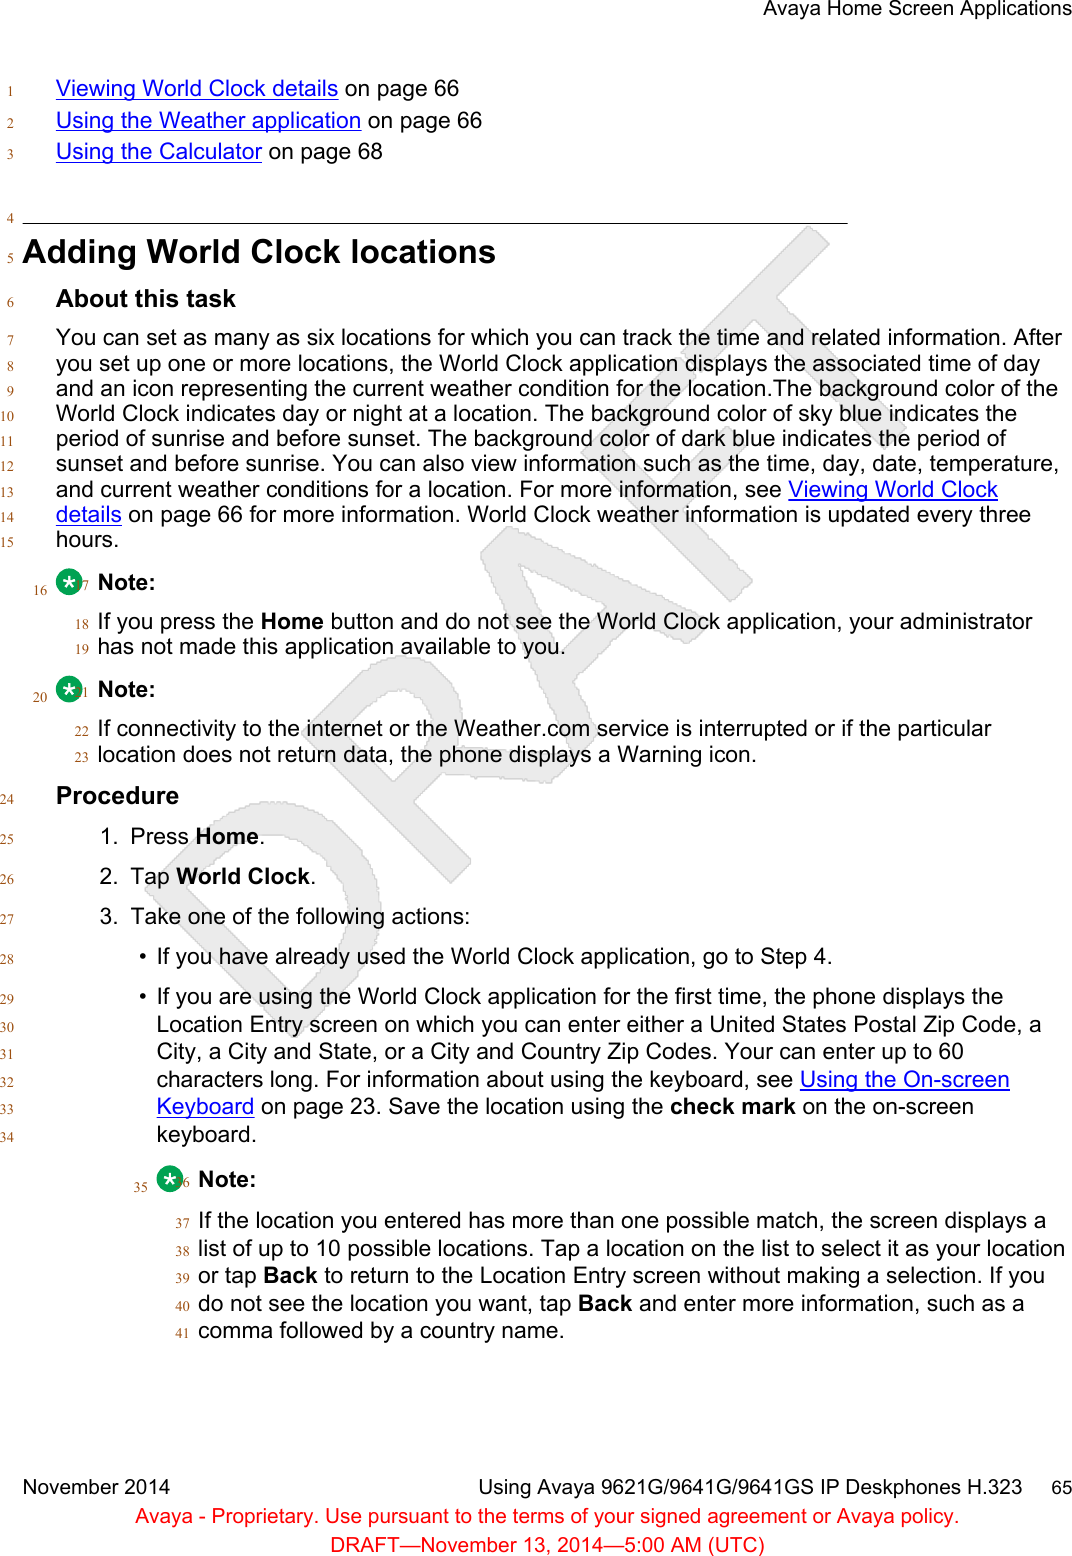 Viewing World Clock details on page 661Using the Weather application on page 662Using the Calculator on page 6834Adding World Clock locations5About this task6You can set as many as six locations for which you can track the time and related information. After7you set up one or more locations, the World Clock application displays the associated time of day8and an icon representing the current weather condition for the location.The background color of the9World Clock indicates day or night at a location. The background color of sky blue indicates the10period of sunrise and before sunset. The background color of dark blue indicates the period of11sunset and before sunrise. You can also view information such as the time, day, date, temperature,12and current weather conditions for a location. For more information, see Viewing World Clock13details on page 66 for more information. World Clock weather information is updated every three14hours.1516 Note:17If you press the Home button and do not see the World Clock application, your administrator18has not made this application available to you.1920 Note:21If connectivity to the internet or the Weather.com service is interrupted or if the particular22location does not return data, the phone displays a Warning icon.23Procedure241. Press Home.252. Tap World Clock.263. Take one of the following actions:27• If you have already used the World Clock application, go to Step 4.28• If you are using the World Clock application for the first time, the phone displays the29Location Entry screen on which you can enter either a United States Postal Zip Code, a30City, a City and State, or a City and Country Zip Codes. Your can enter up to 6031characters long. For information about using the keyboard, see Using the On-screen32Keyboard on page 23. Save the location using the check mark on the on-screen33keyboard.3435 Note:36If the location you entered has more than one possible match, the screen displays a37list of up to 10 possible locations. Tap a location on the list to select it as your location38or tap Back to return to the Location Entry screen without making a selection. If you39do not see the location you want, tap Back and enter more information, such as a40comma followed by a country name.41Avaya Home Screen ApplicationsNovember 2014 Using Avaya 9621G/9641G/9641GS IP Deskphones H.323     65Avaya - Proprietary. Use pursuant to the terms of your signed agreement or Avaya policy.DRAFT—November 13, 2014—5:00 AM (UTC)